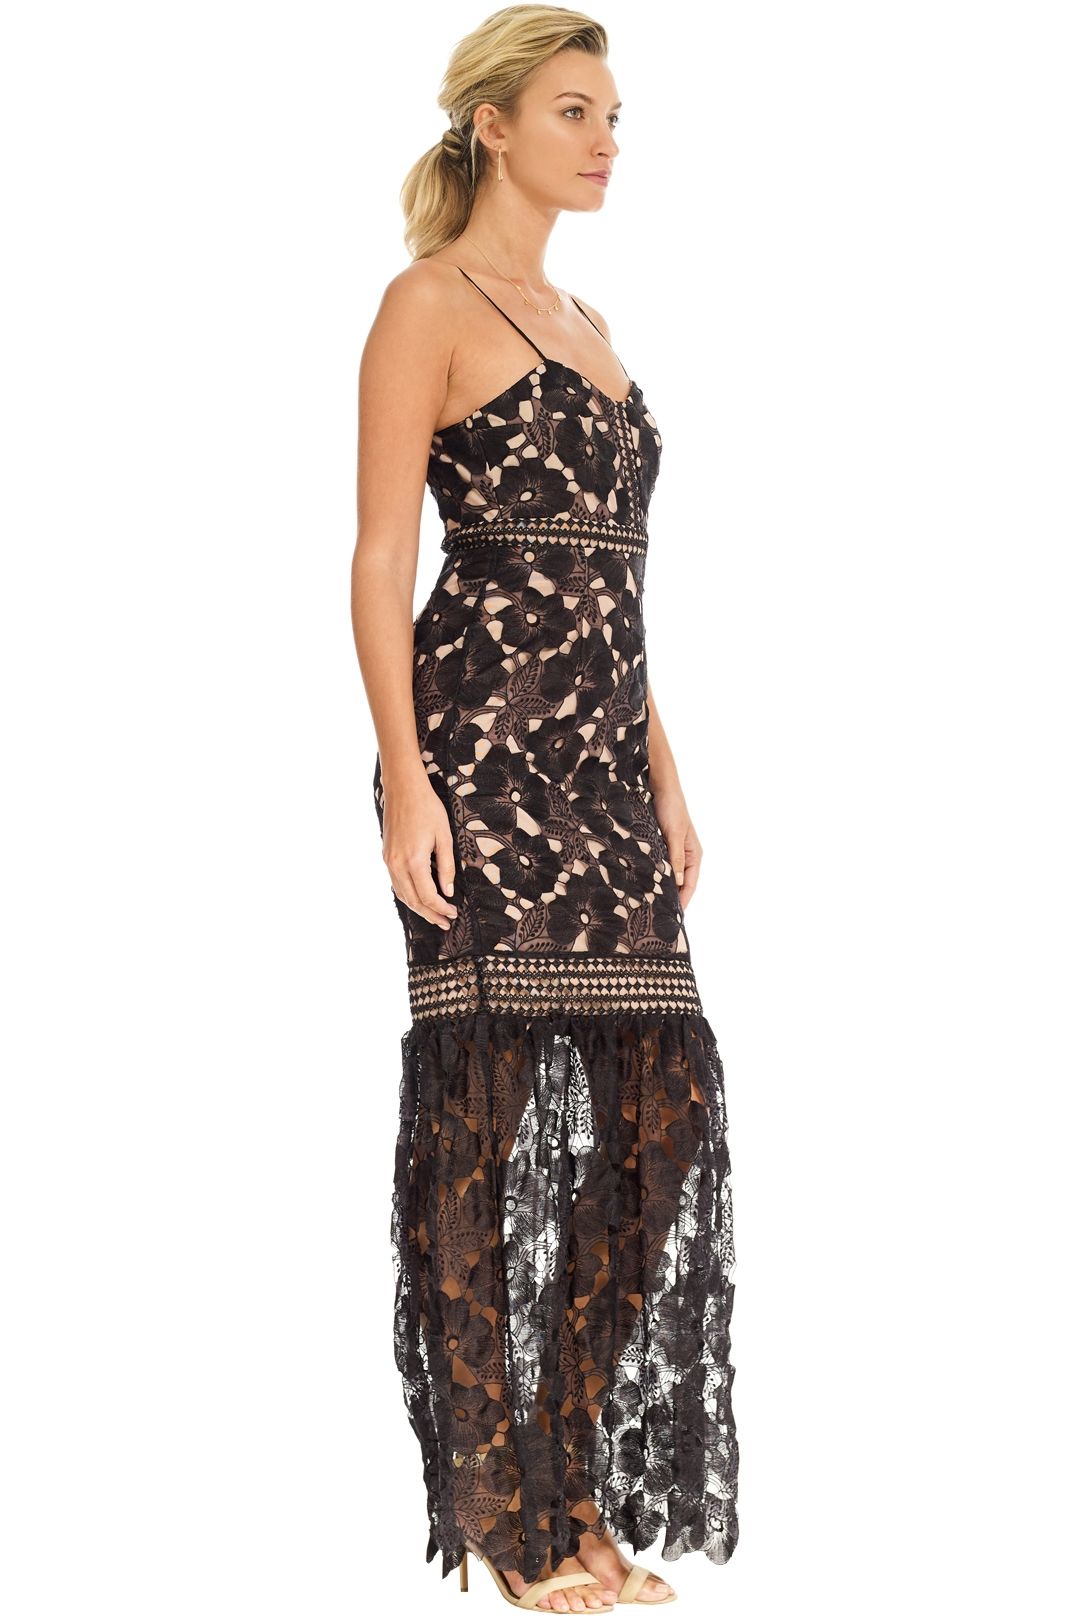 Grace and Hart - Serene Gown - Black - Side